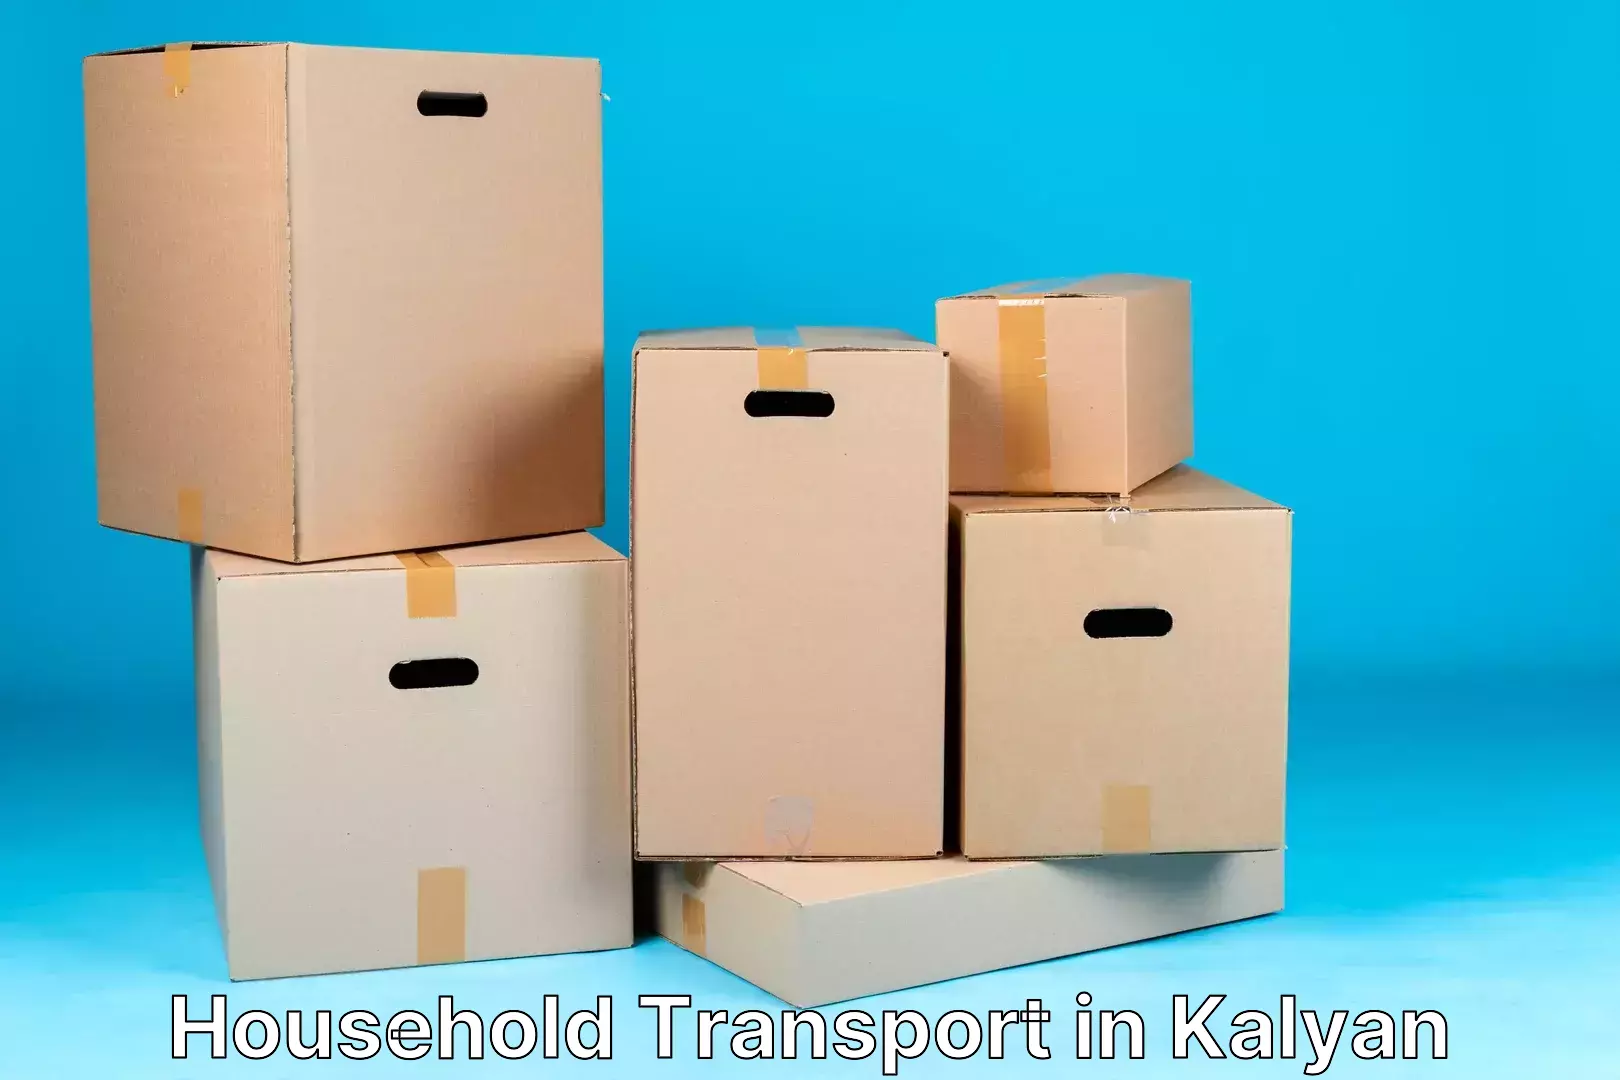 Hassle-free relocation in Kalyan